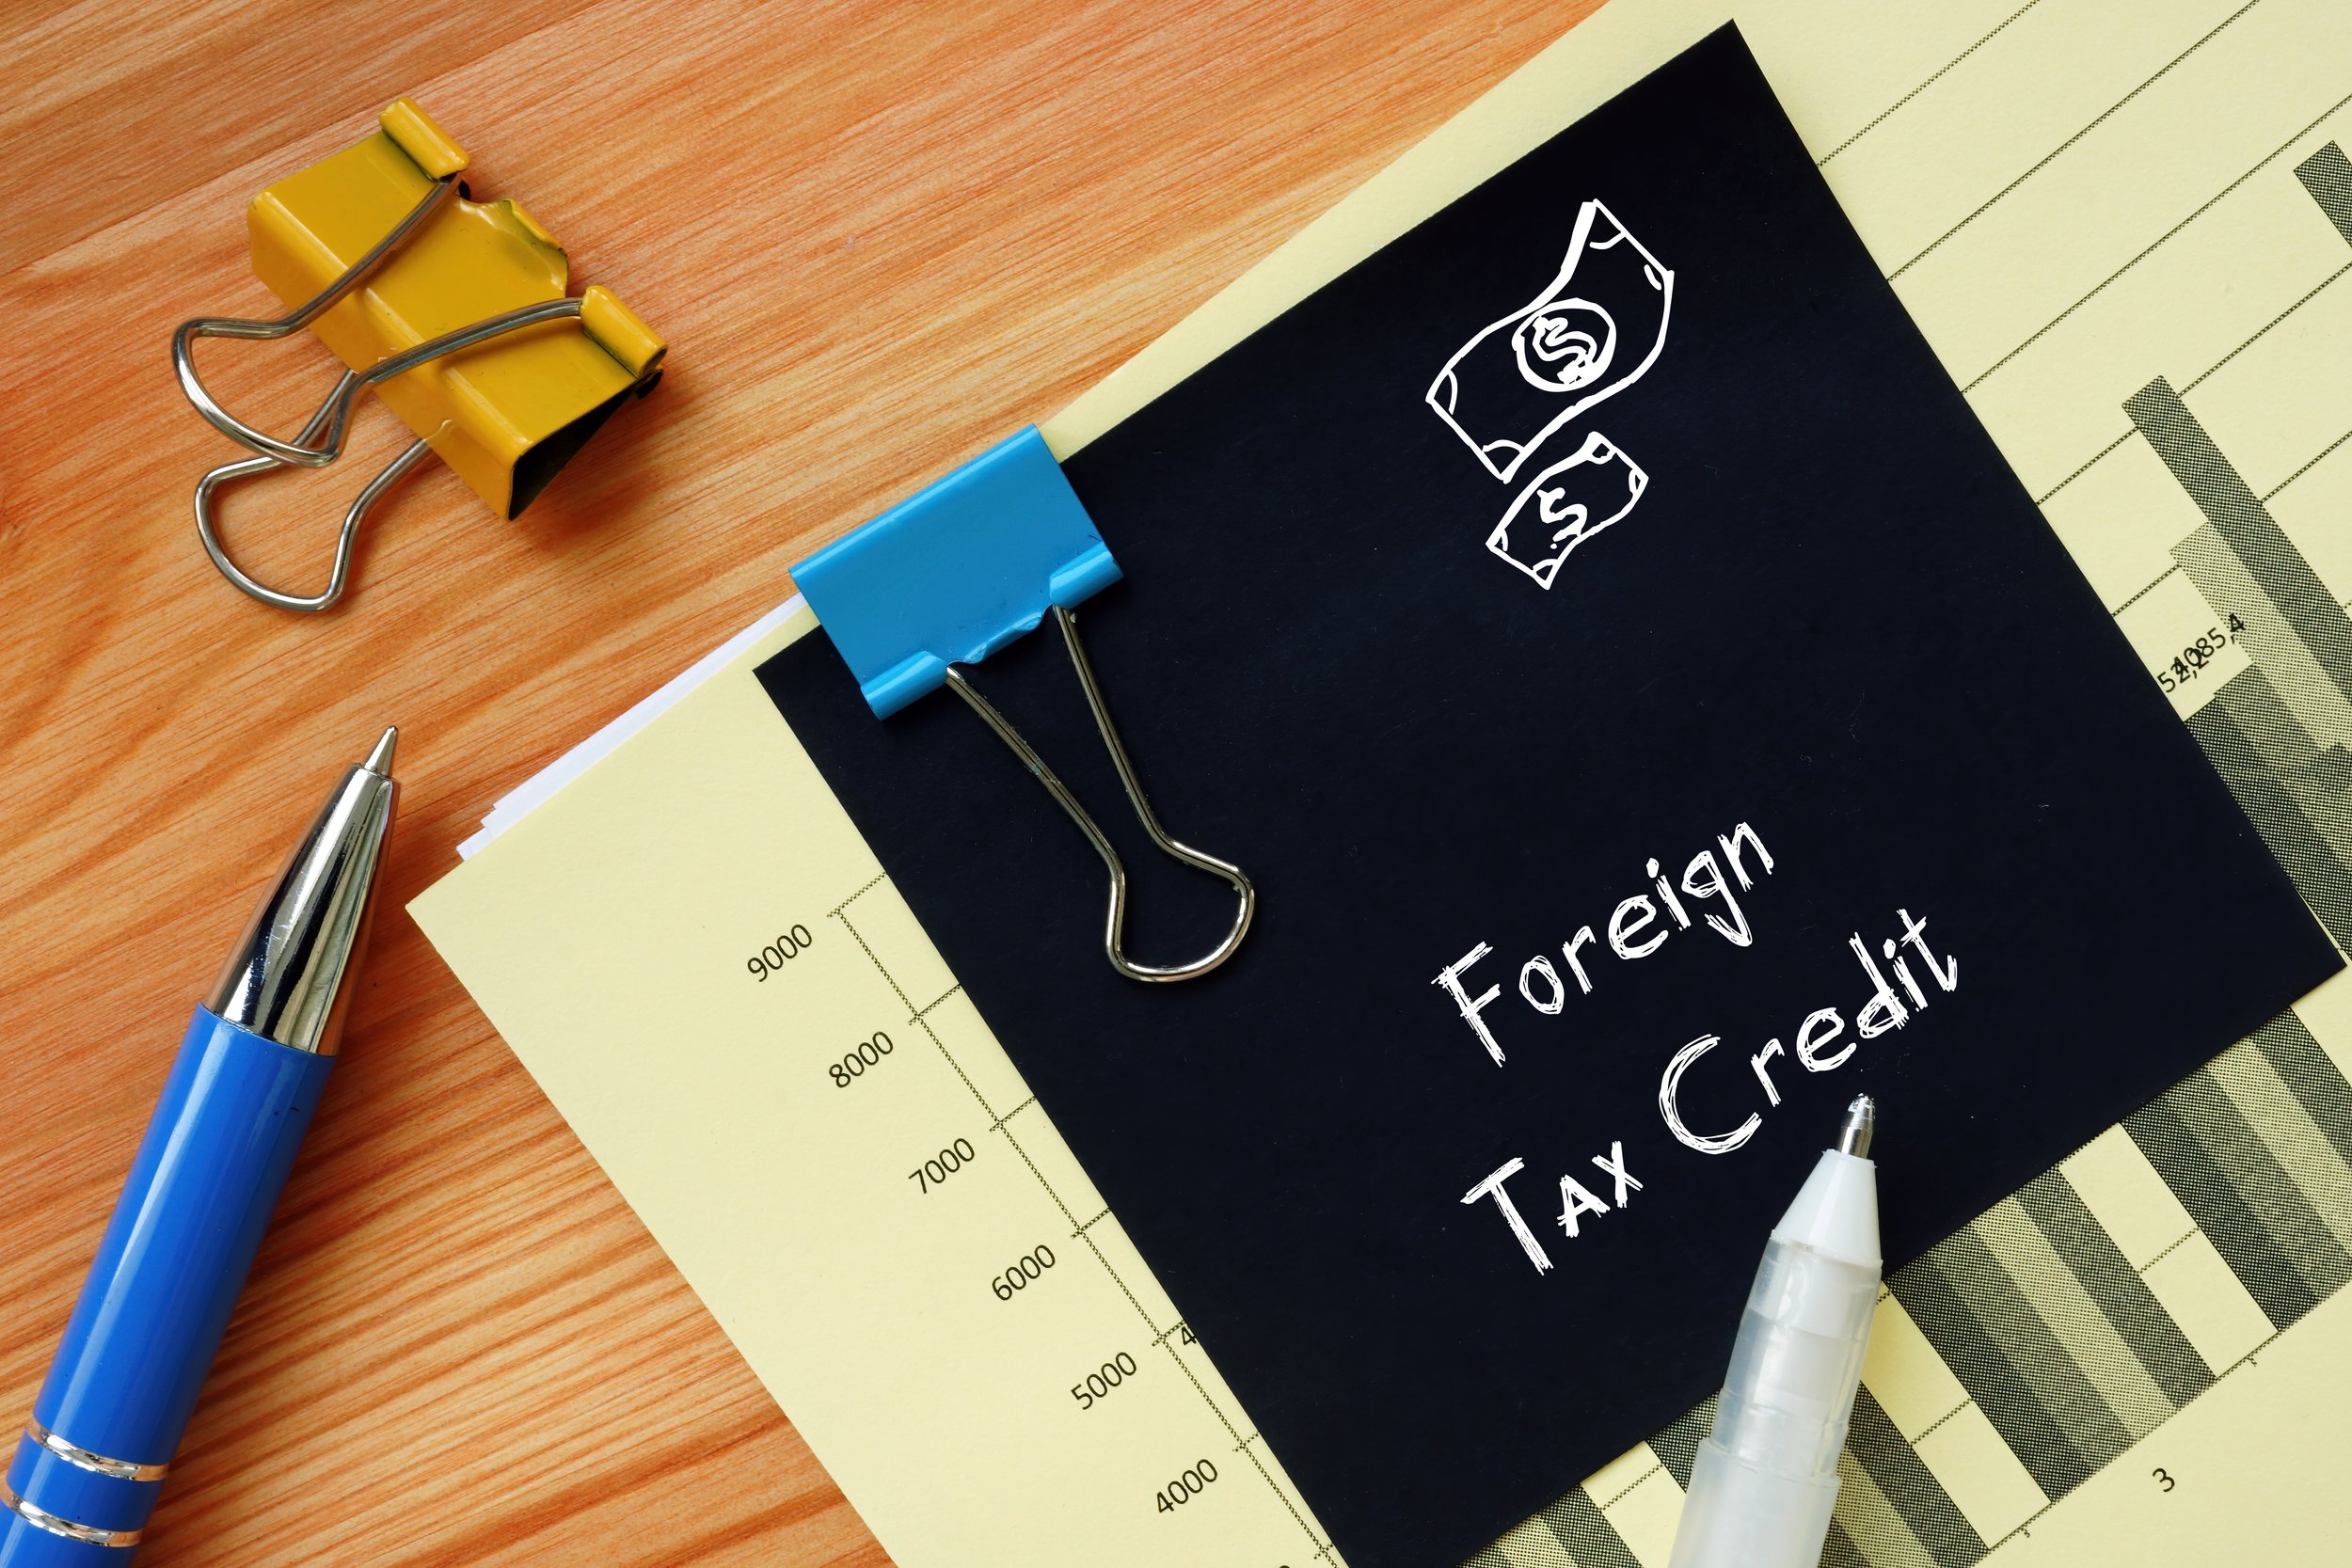 Foreign Tax Credits -The New Arm's Length Requirement